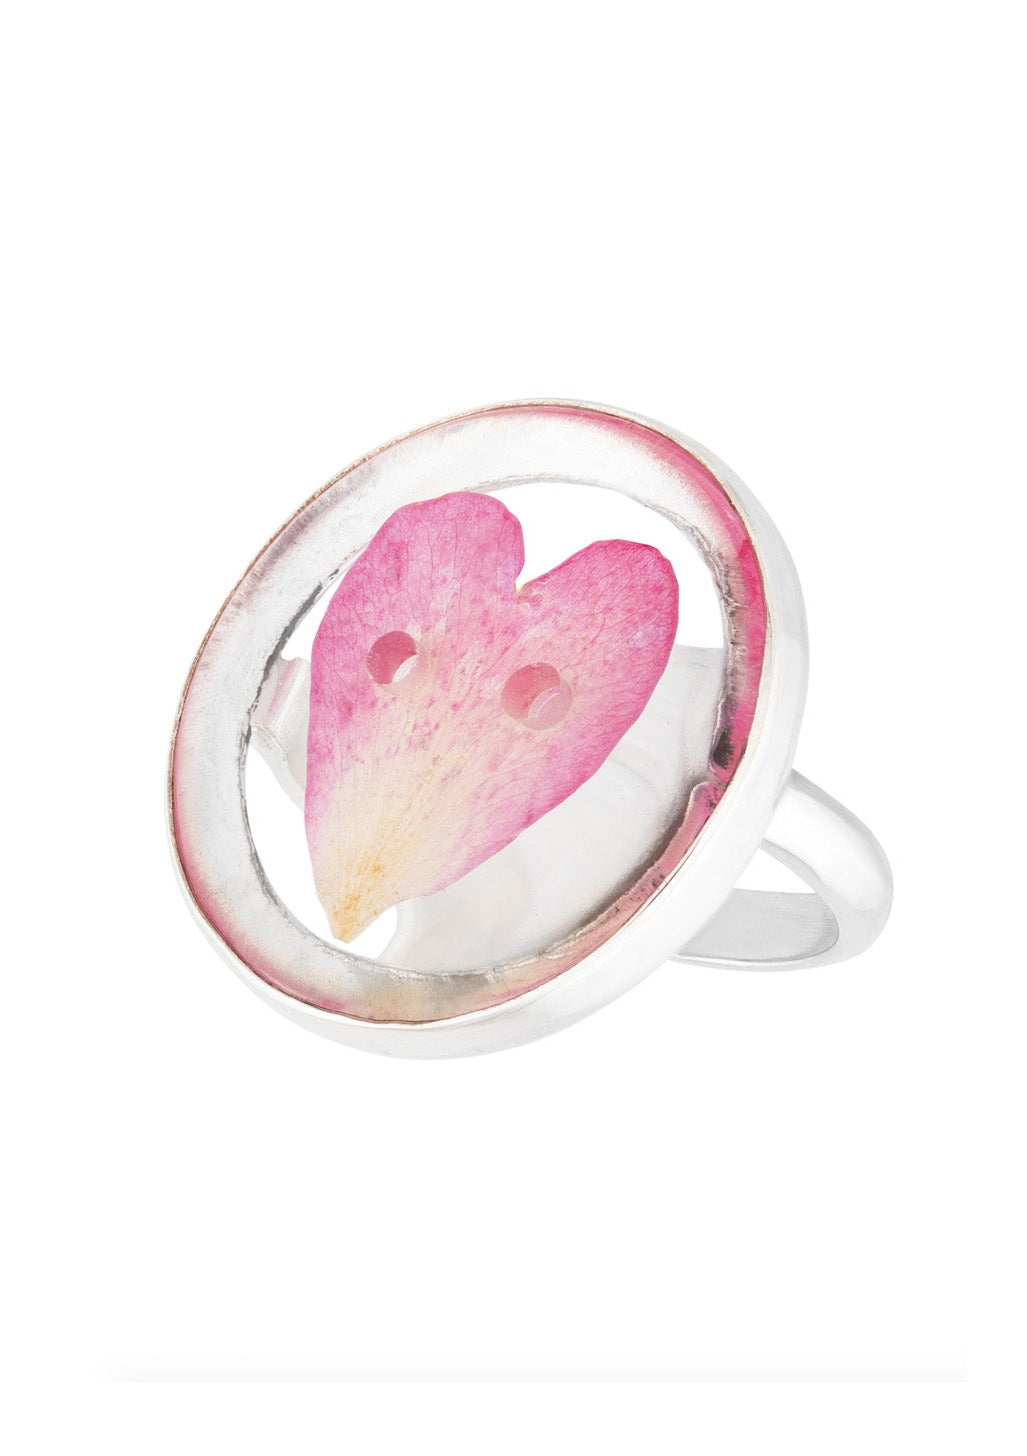 Rose petal preserved in round button shaped ring on silver ring band.